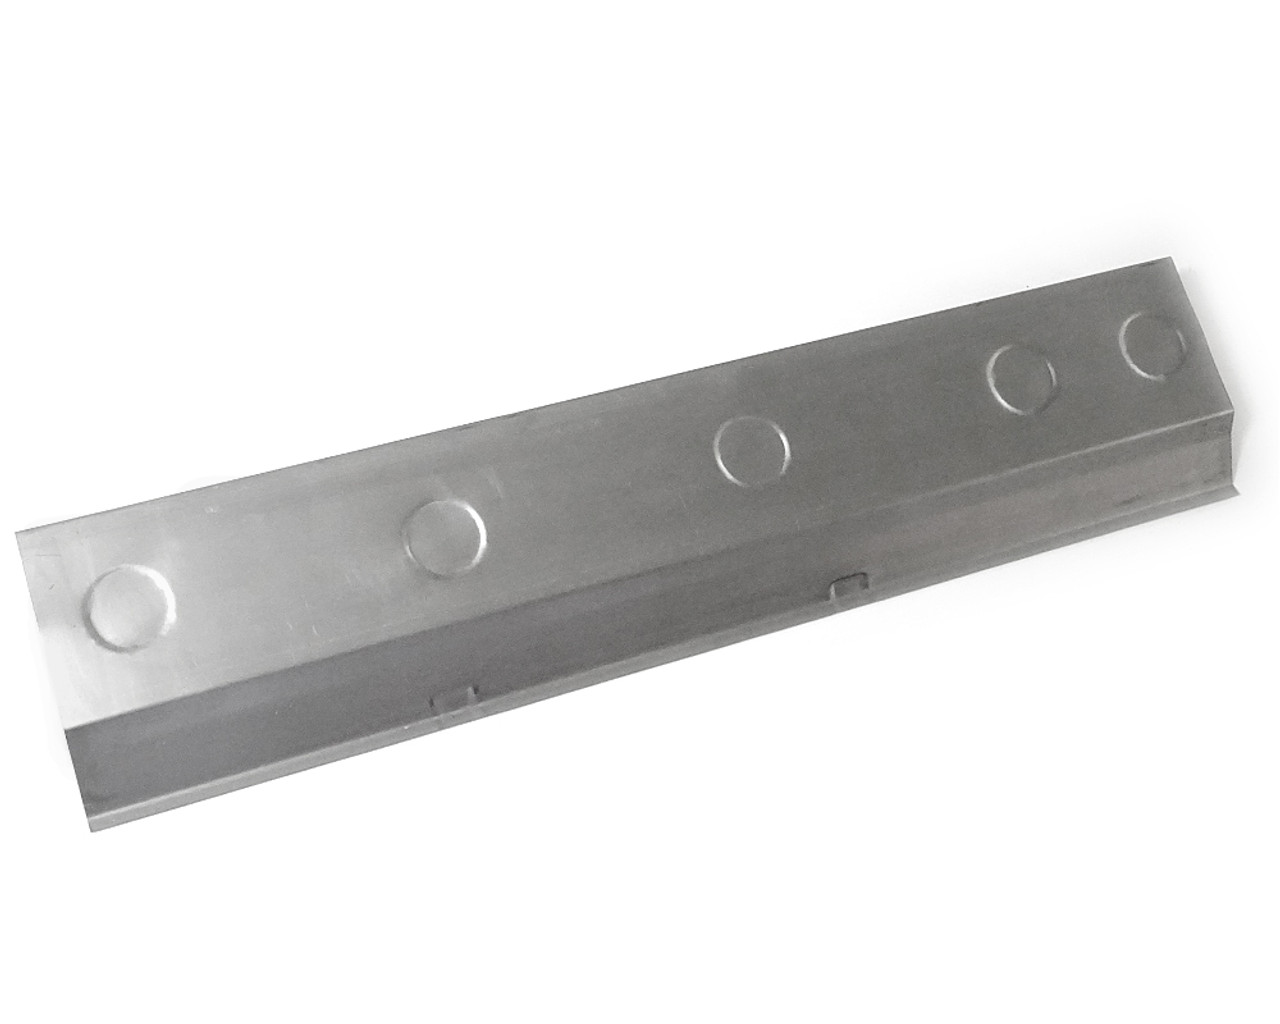 Passenger side (right) outer sill or rocker center section
FIAT 124 Spider, Spider 2000 and Pininfarina - 1966-1985
Auto Ricambi
RE9-446-R